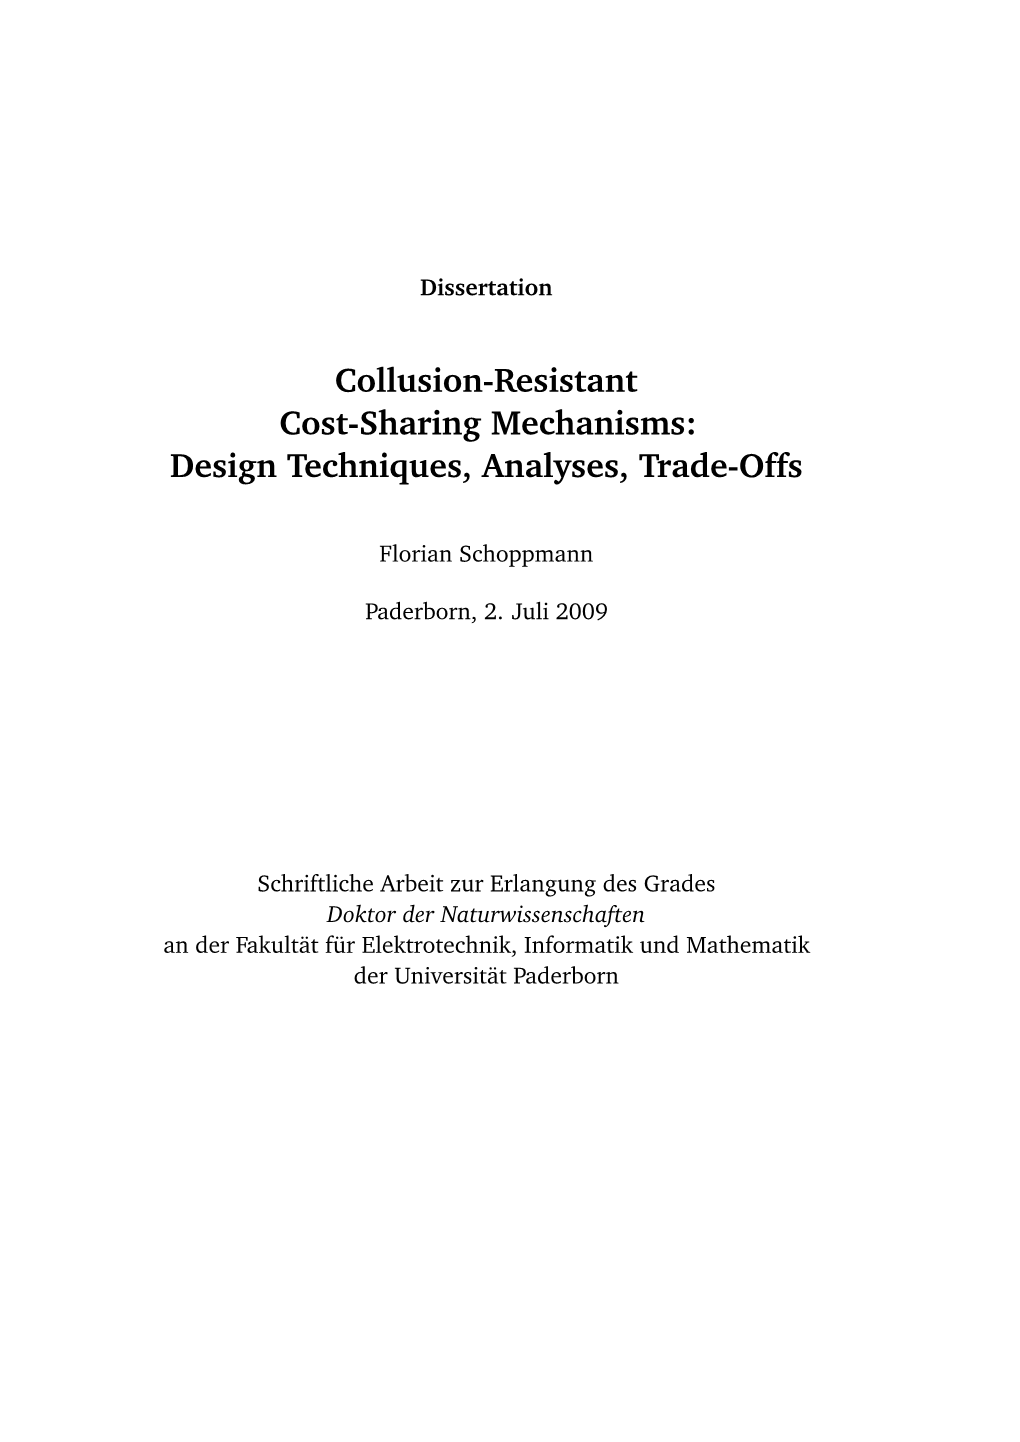 Collusion-Resistant Cost-Sharing Mechanisms: Design Techniques, Analyses, Trade-Offs